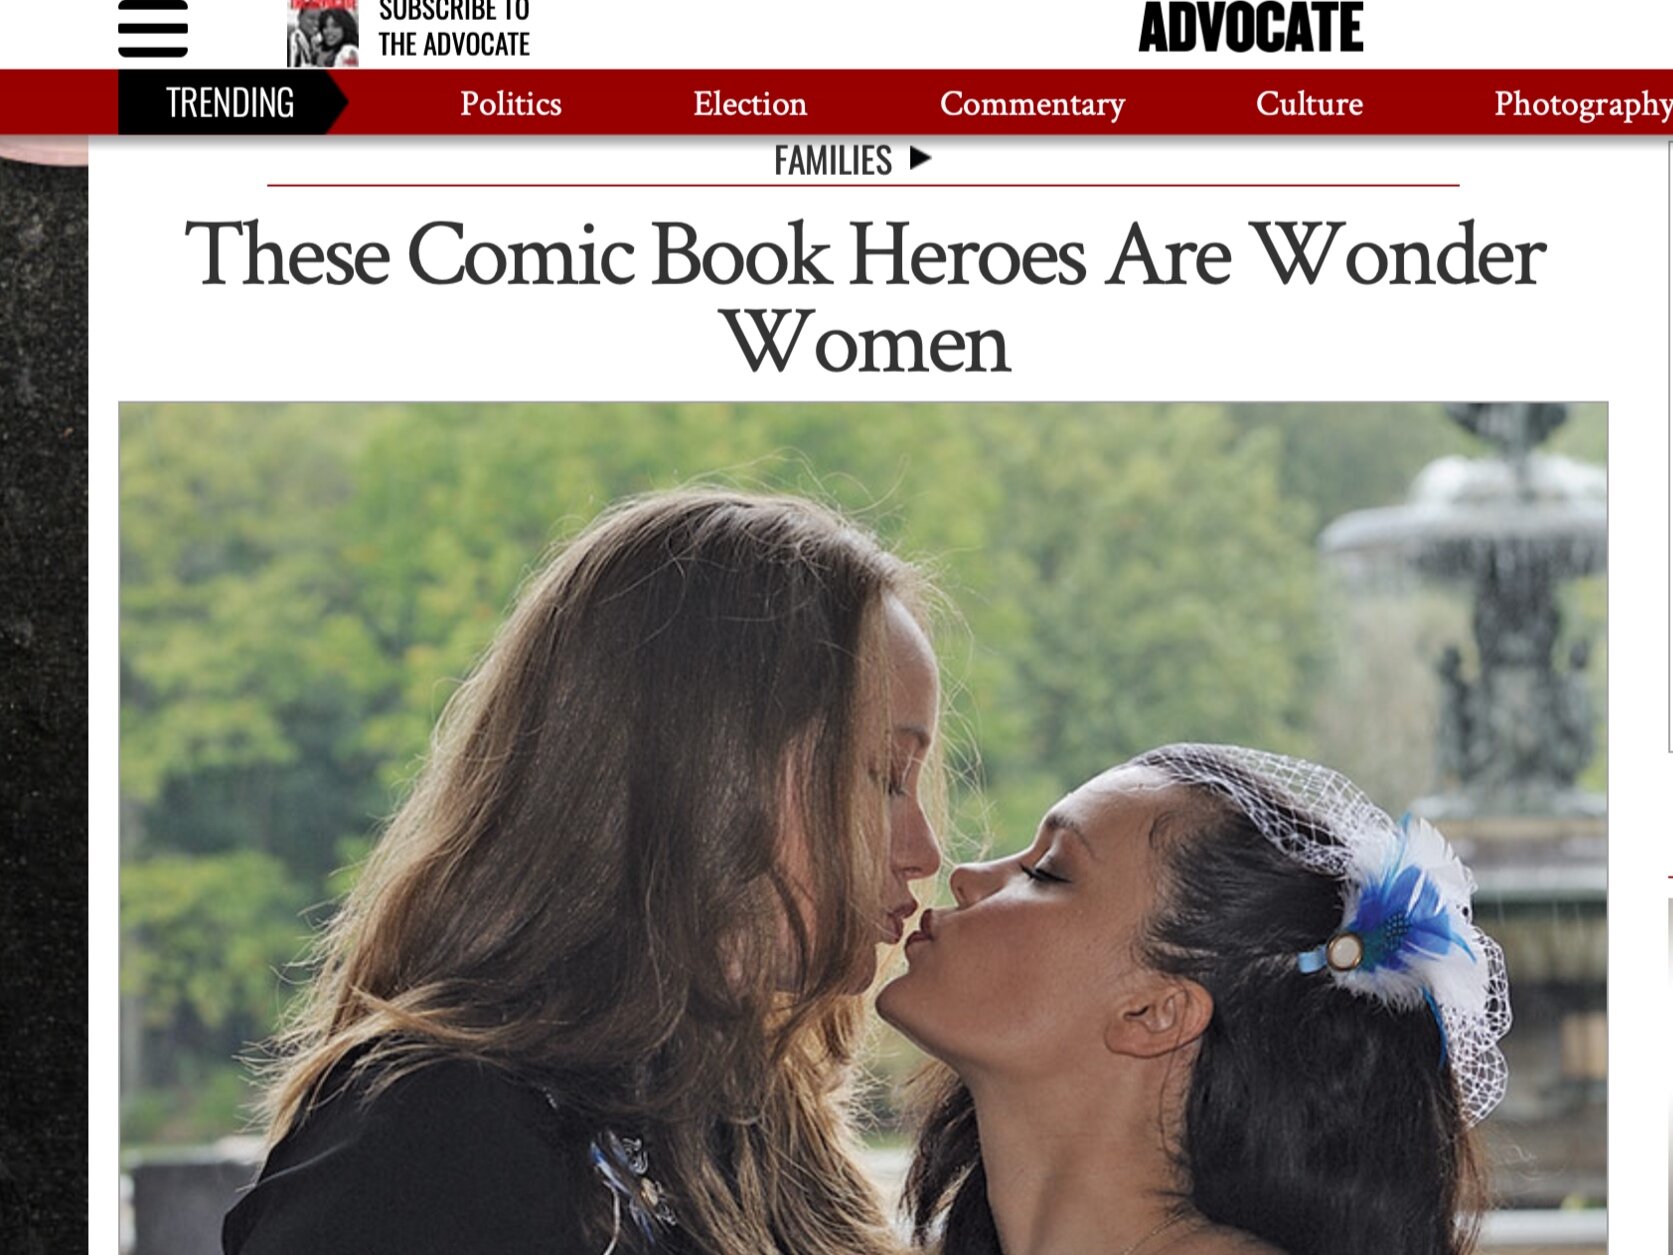 THE ADVOCATE: These Comic Book Heroes Are Wonder Women